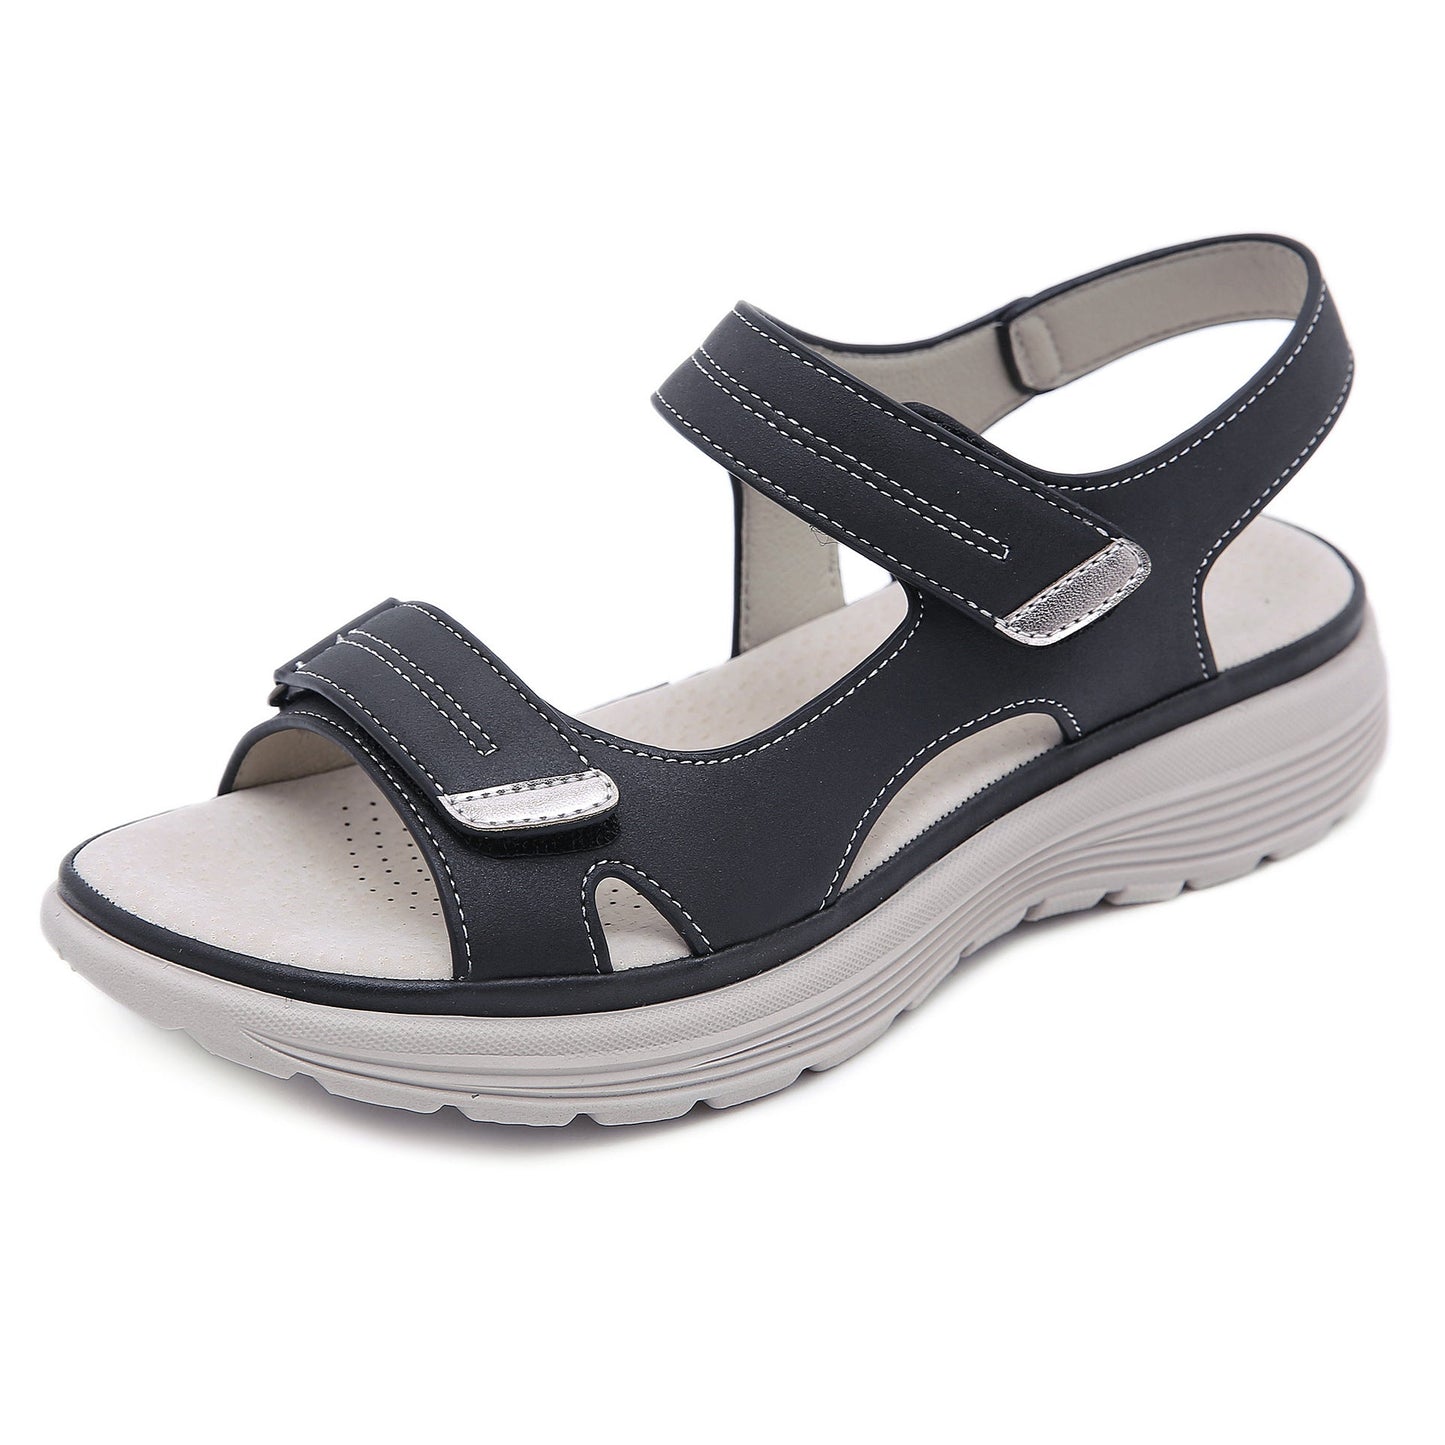 Comfortable Sandals Ladies Slip-on Wedge Sandals Sports Beach Walk Shoes Summer Fashion Casual Shoes - Boots BootiesShoescute orthopedic sandalsFlat Sandalsladies sandals